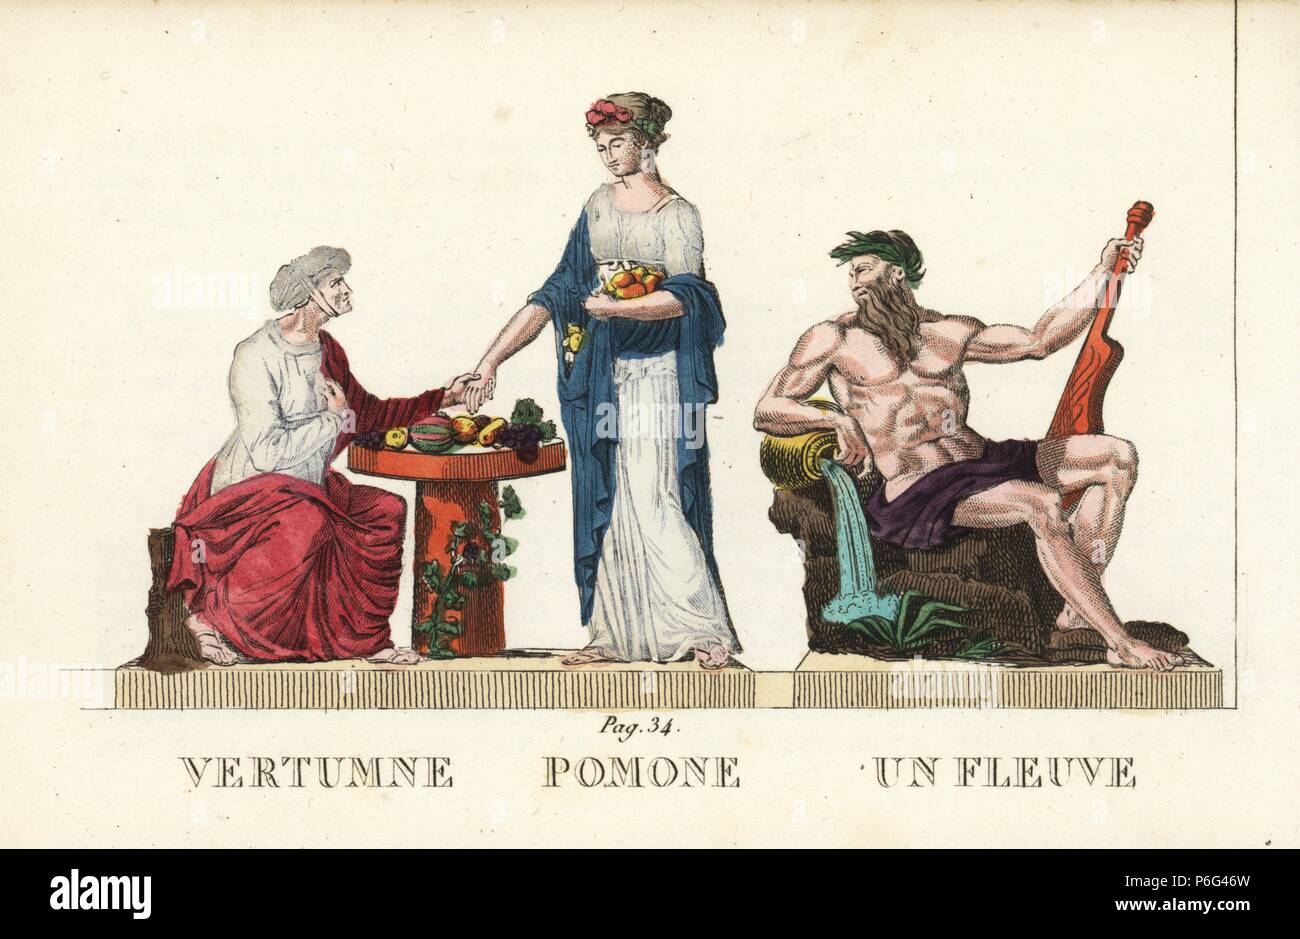 Vertumnus, Pomona and a Greek river god, classical gods of the seasons, fruit and rivers. Handcoloured copperplate engraving engraved by Jacques Louis Constant Lacerf after illustrations by Leonard Defraine from 'La Mythologie en Estampes' (Mythology in Prints, or Figures of Fabled Gods), Chez P. Blanchard, Paris, c.1820. Stock Photo